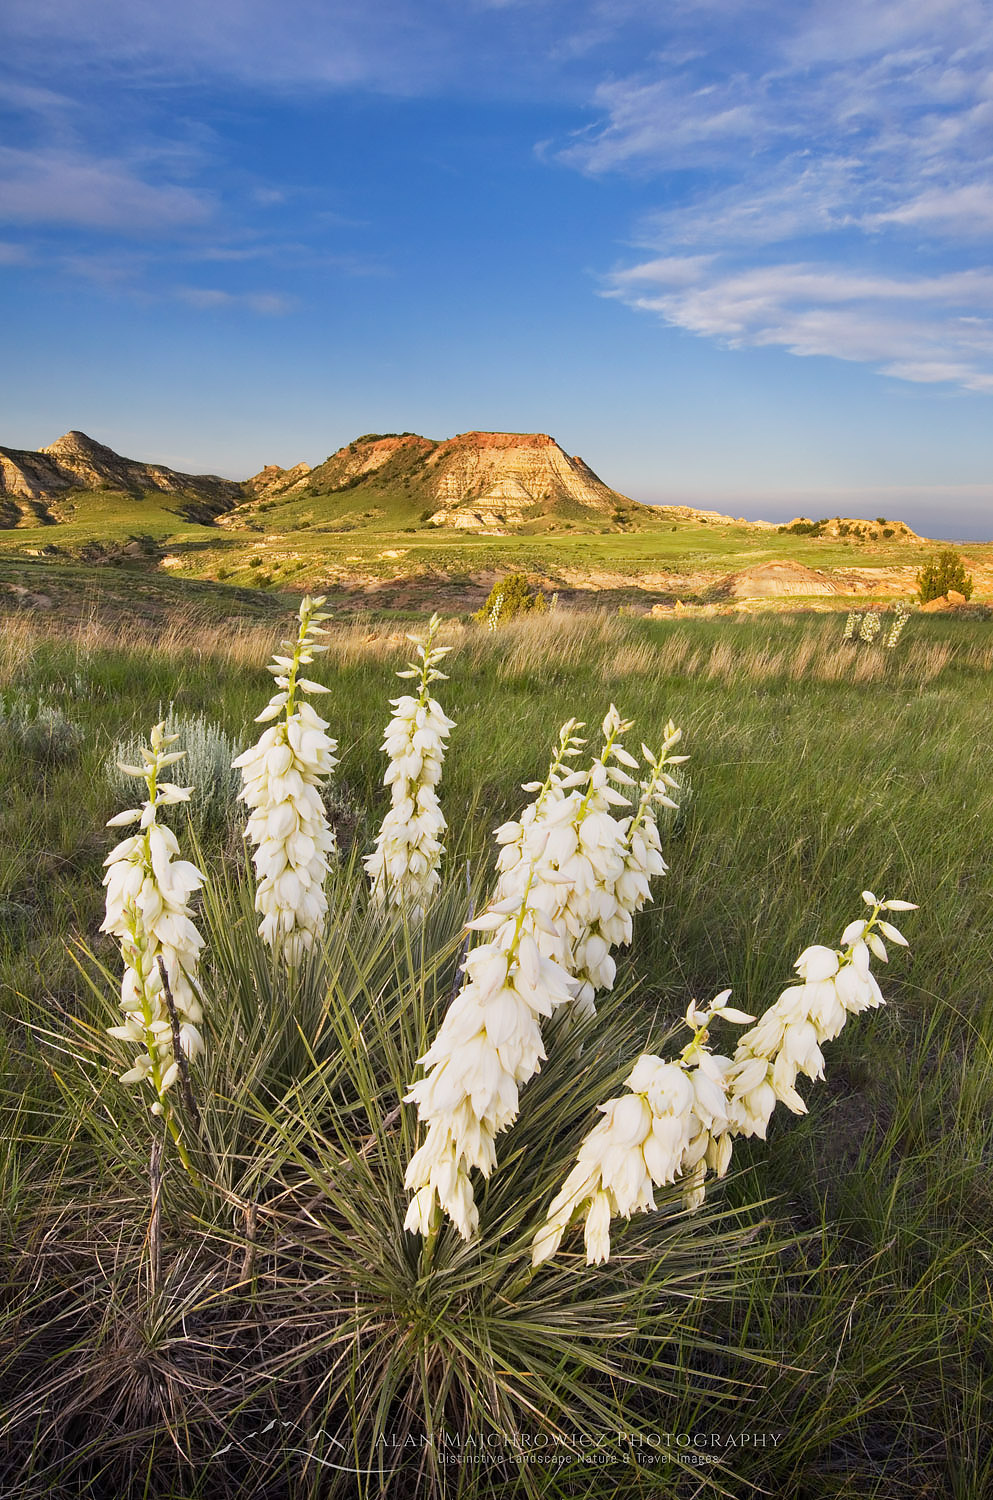 Soapweed Yucca (Yucca glauca) in the Terry Badlands Montana #52636